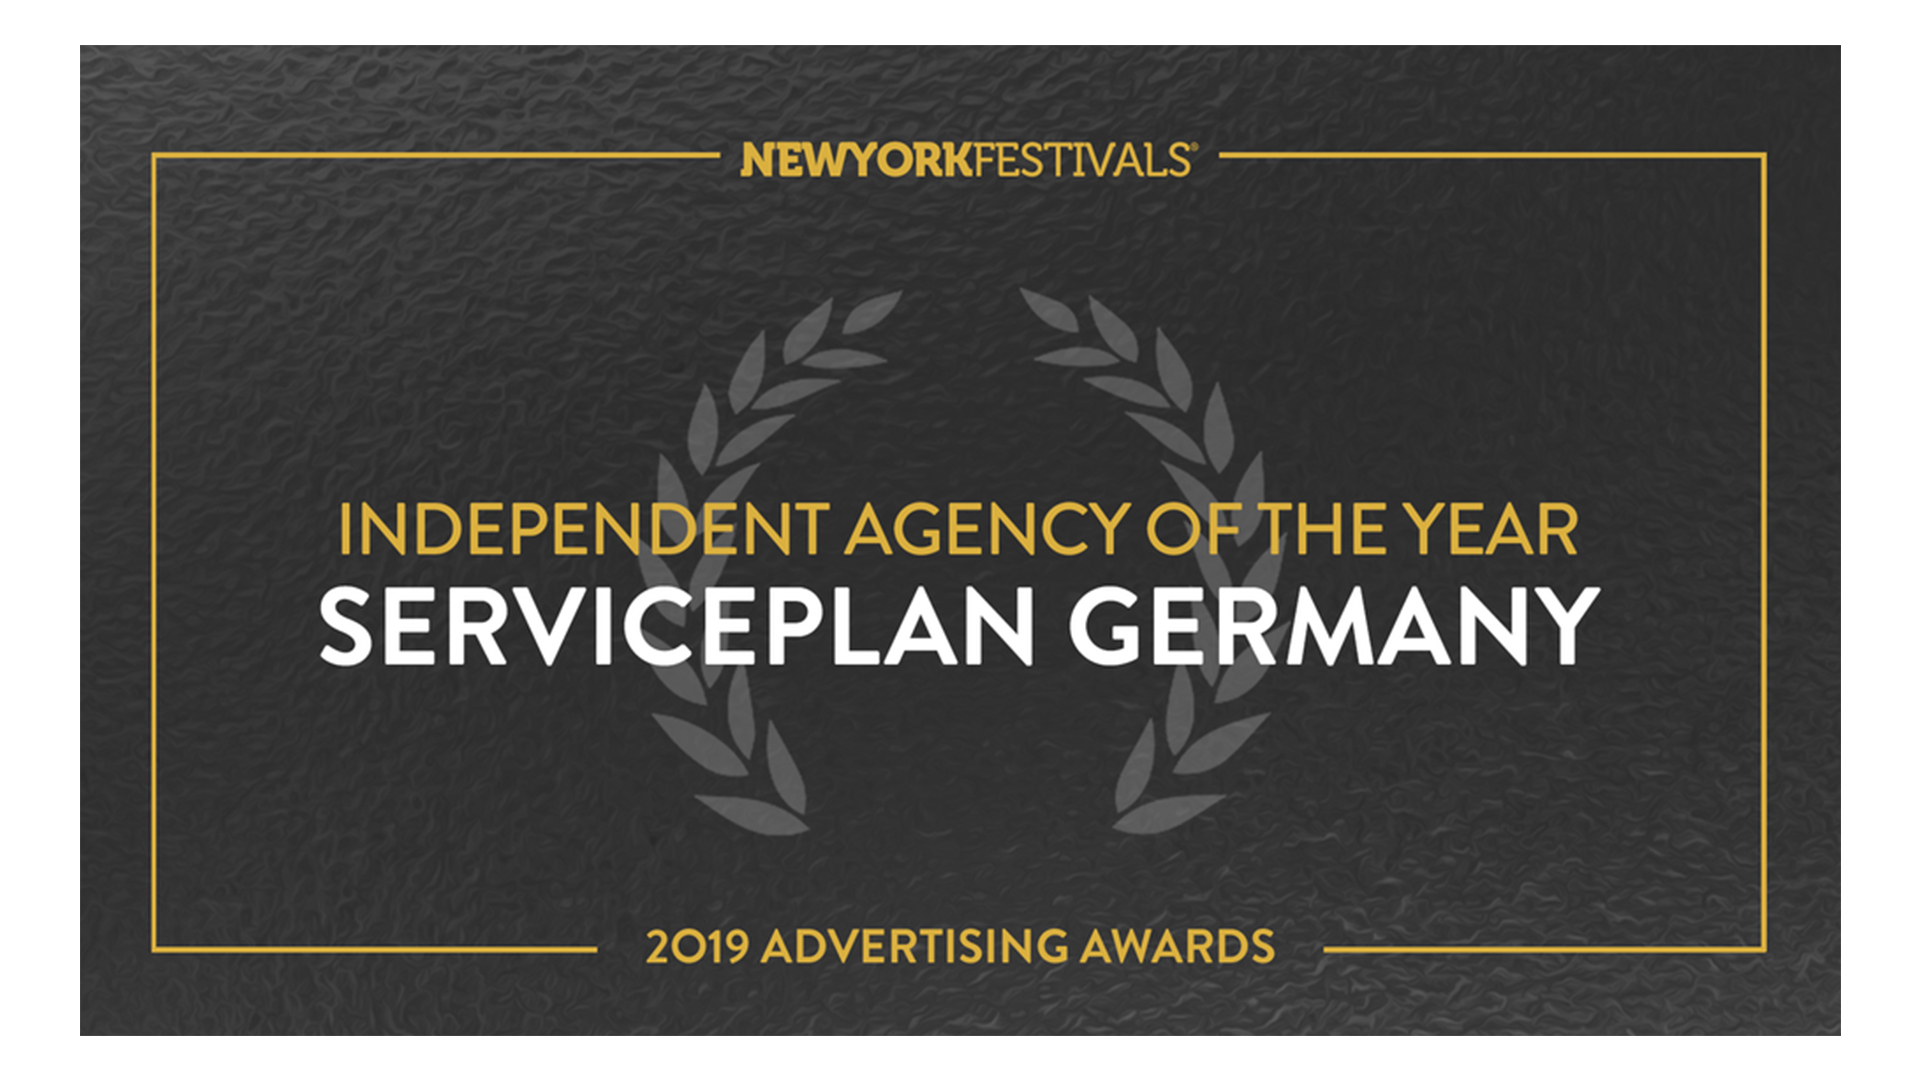 Independent Agency of the Year 